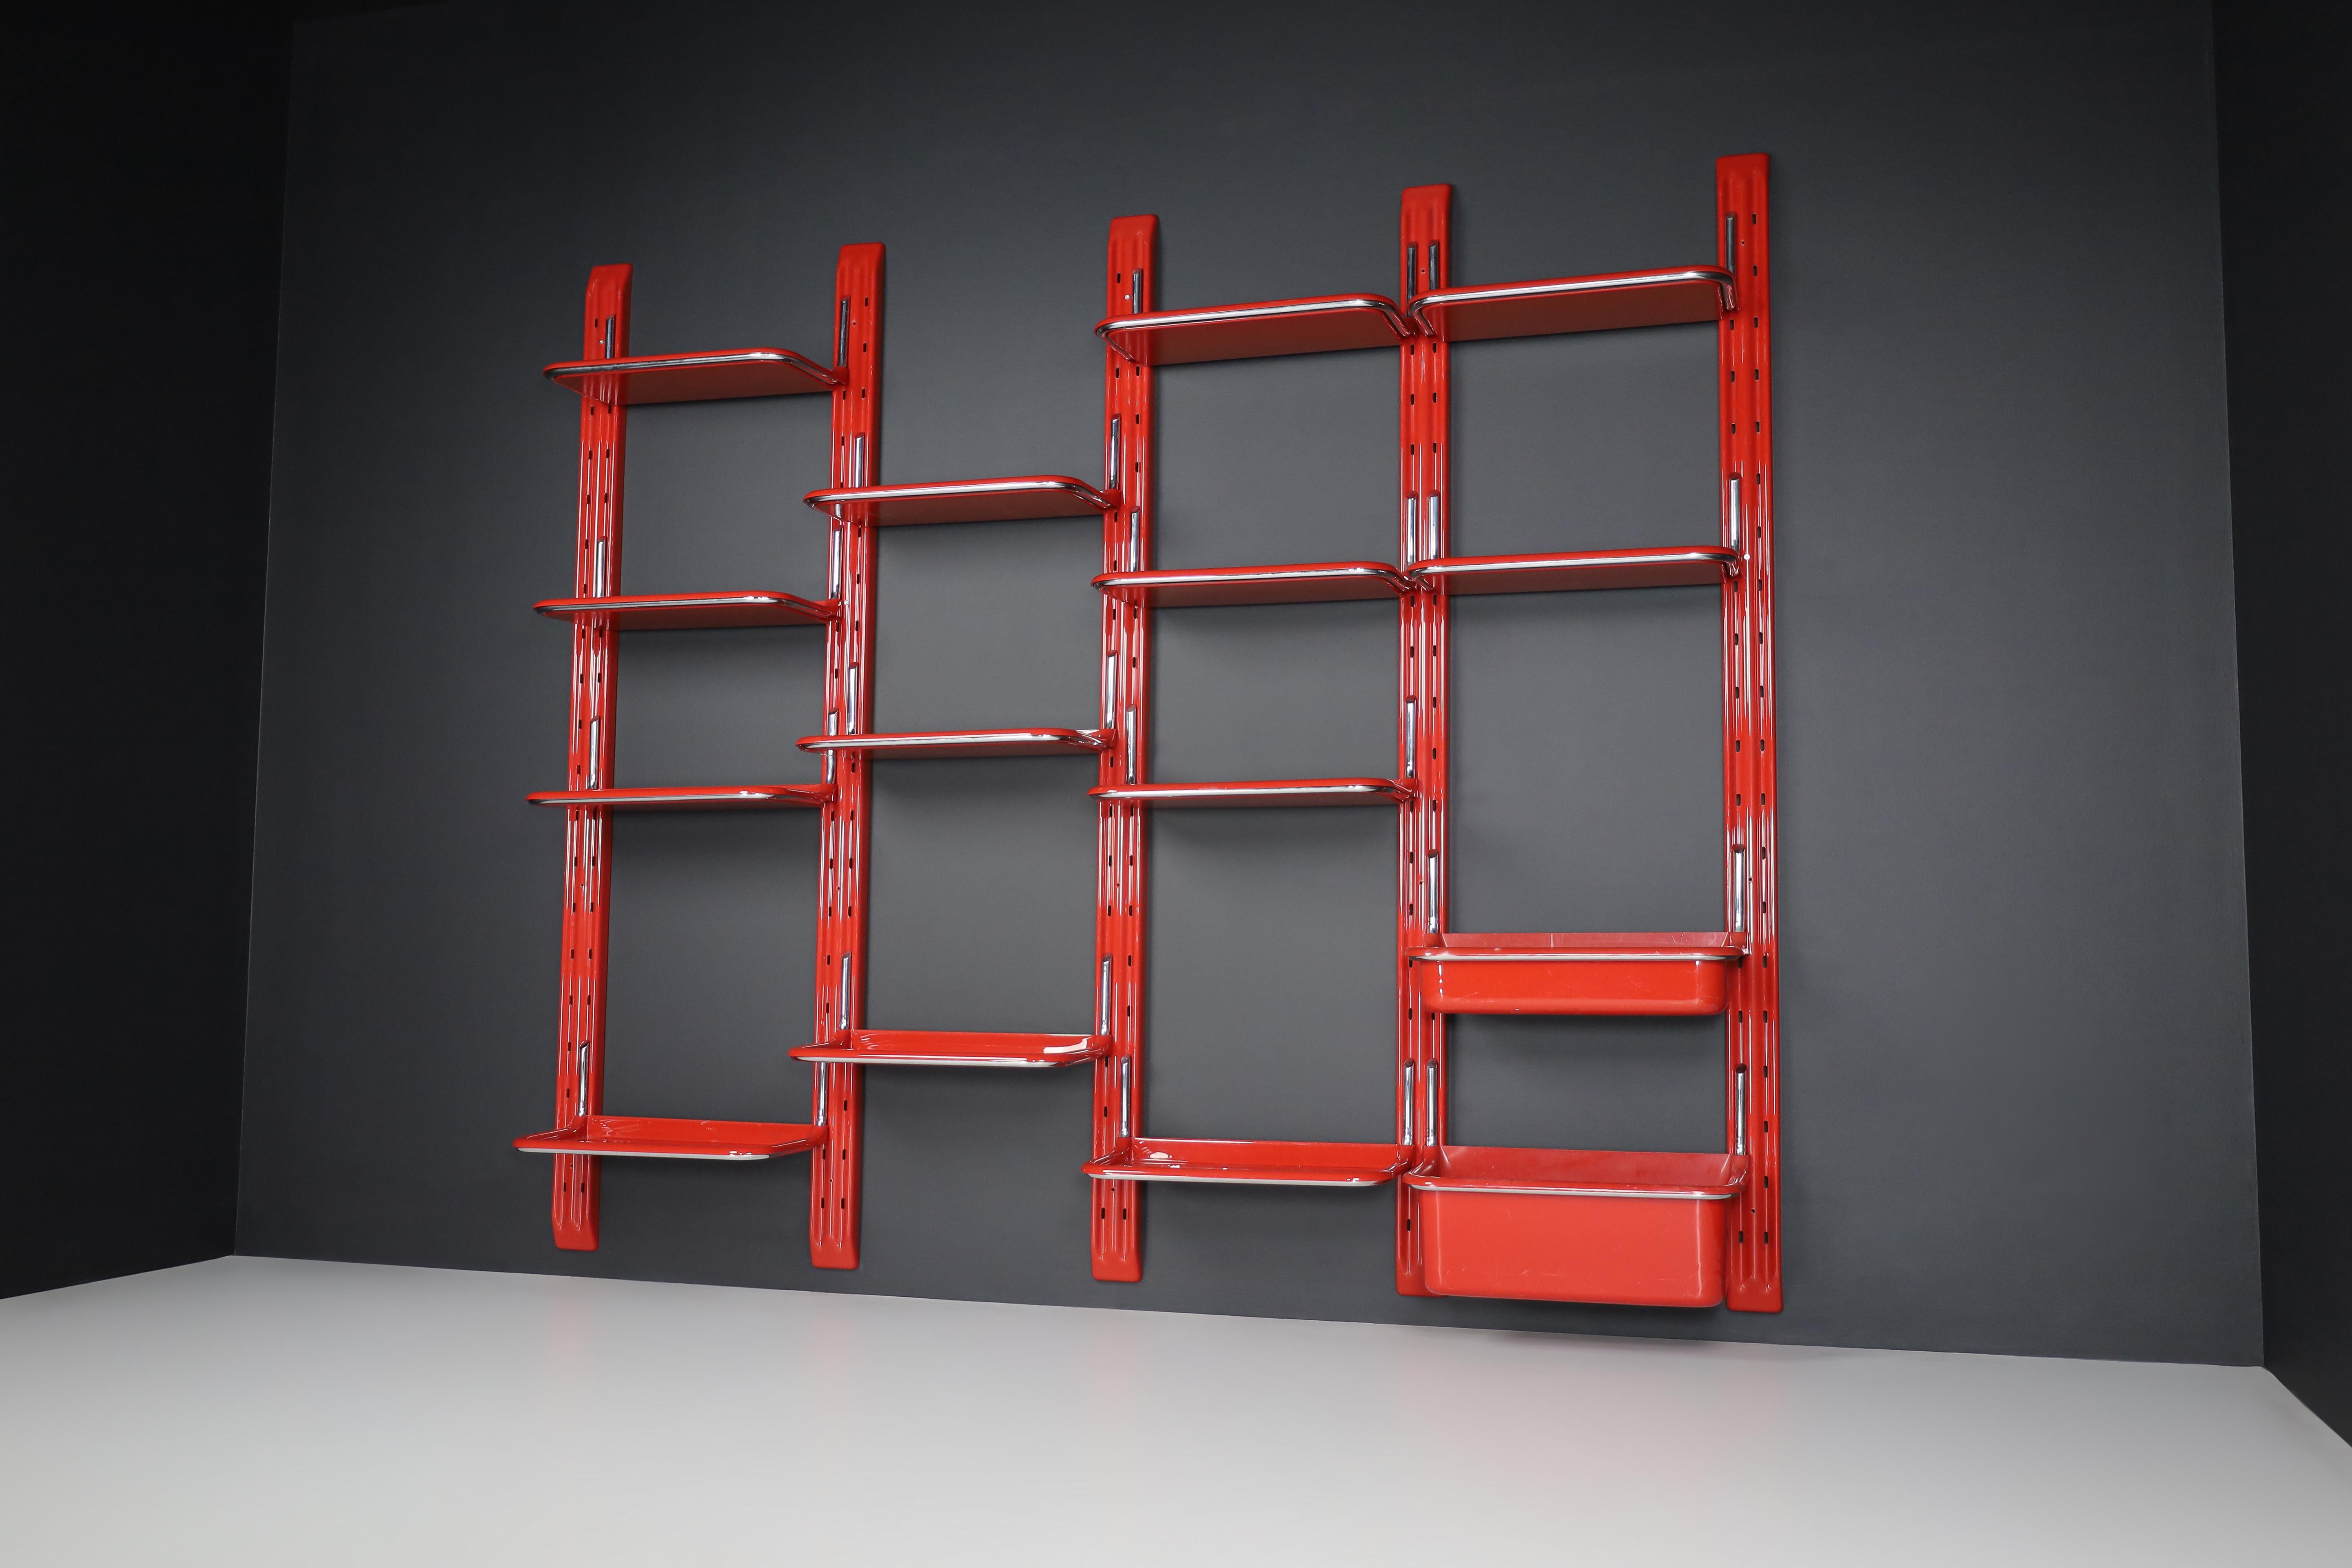 Large speedy bookcase by Alberto Rosselli for Saporiti, the 1970s

Alberto Rosselli for Saporiti, wall-unit ‘Speedy’, red plastic, chromed metal, Italy, the 1970s. This funky wall unit was designed by Alberto Rosselli circa 1970. The red colour of